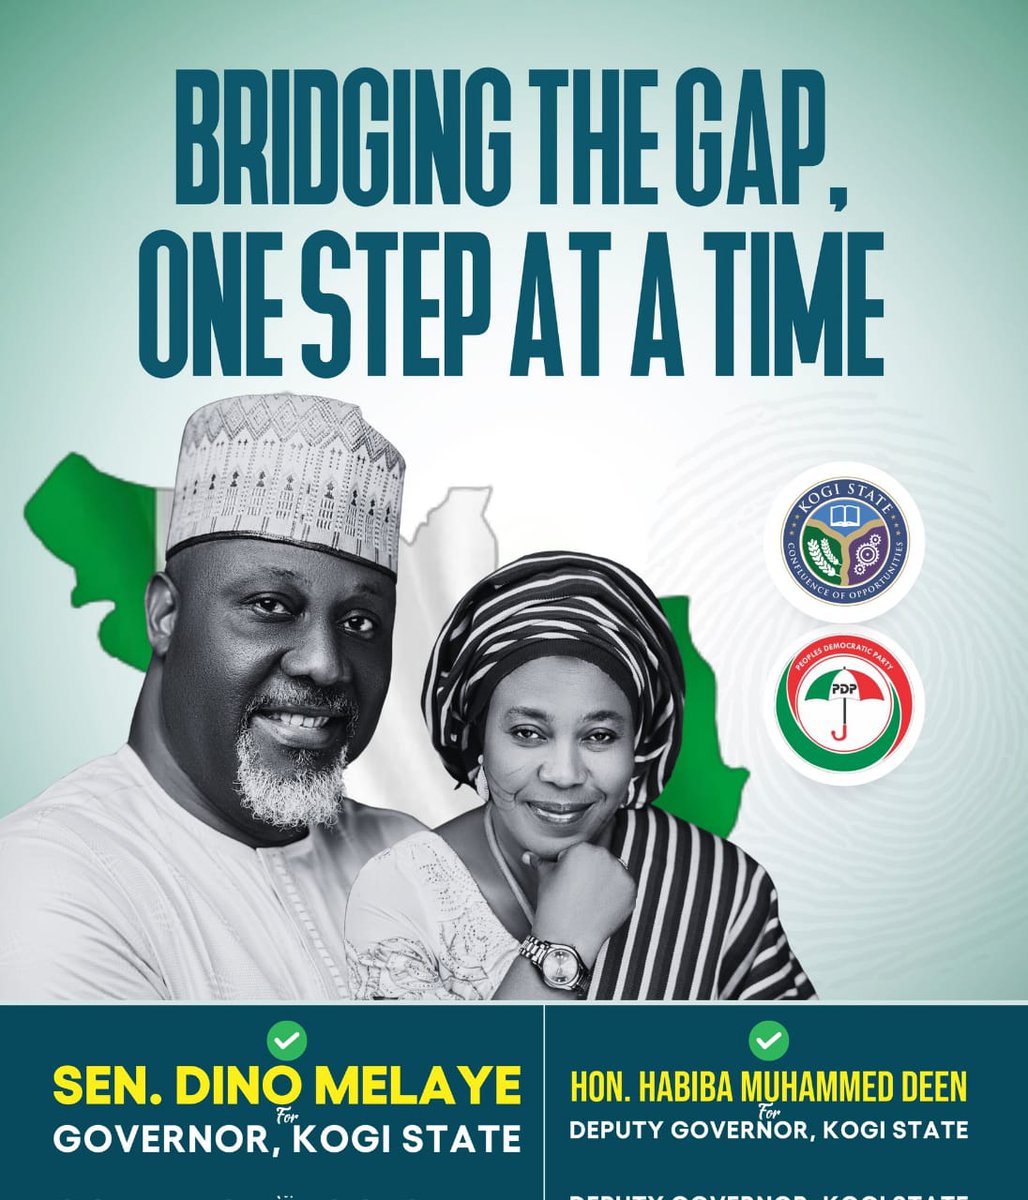 DINO is bridging the gap, one step at a time.

Let's support DINO MELAYE FOR GOVERNOR 

@OfficialPDPNig @pdpvanguard, @pdpnewgen, @PDP_NEWMEDIA, @pdp_connect
@kogireports
@IsahAbdullatif
@_dinomelaye
#DinoIsComing #OneKogiOneDestiny #Dino4Governor #KogiSaiDino #PDP #TheTimeIsNow